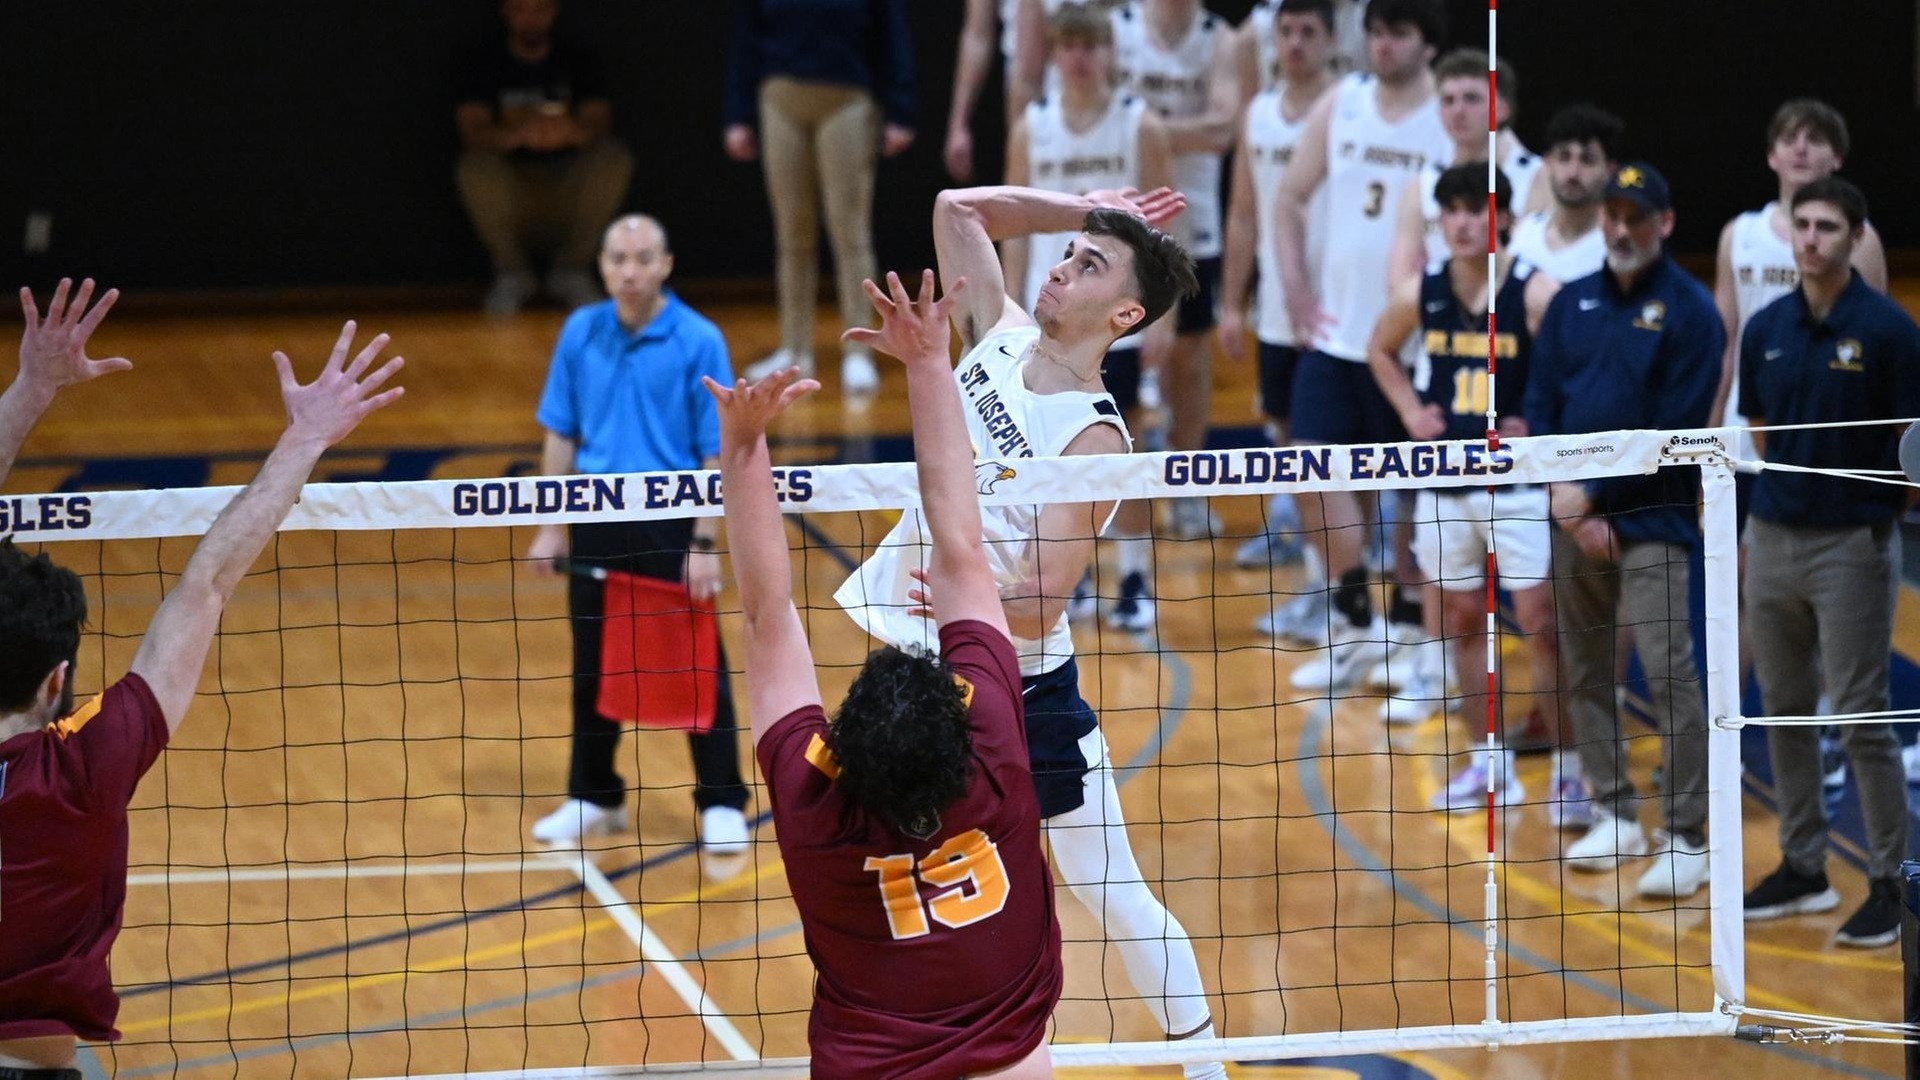 Men's Volleyball Earns Wins over Ramapo and Sarah Lawrence